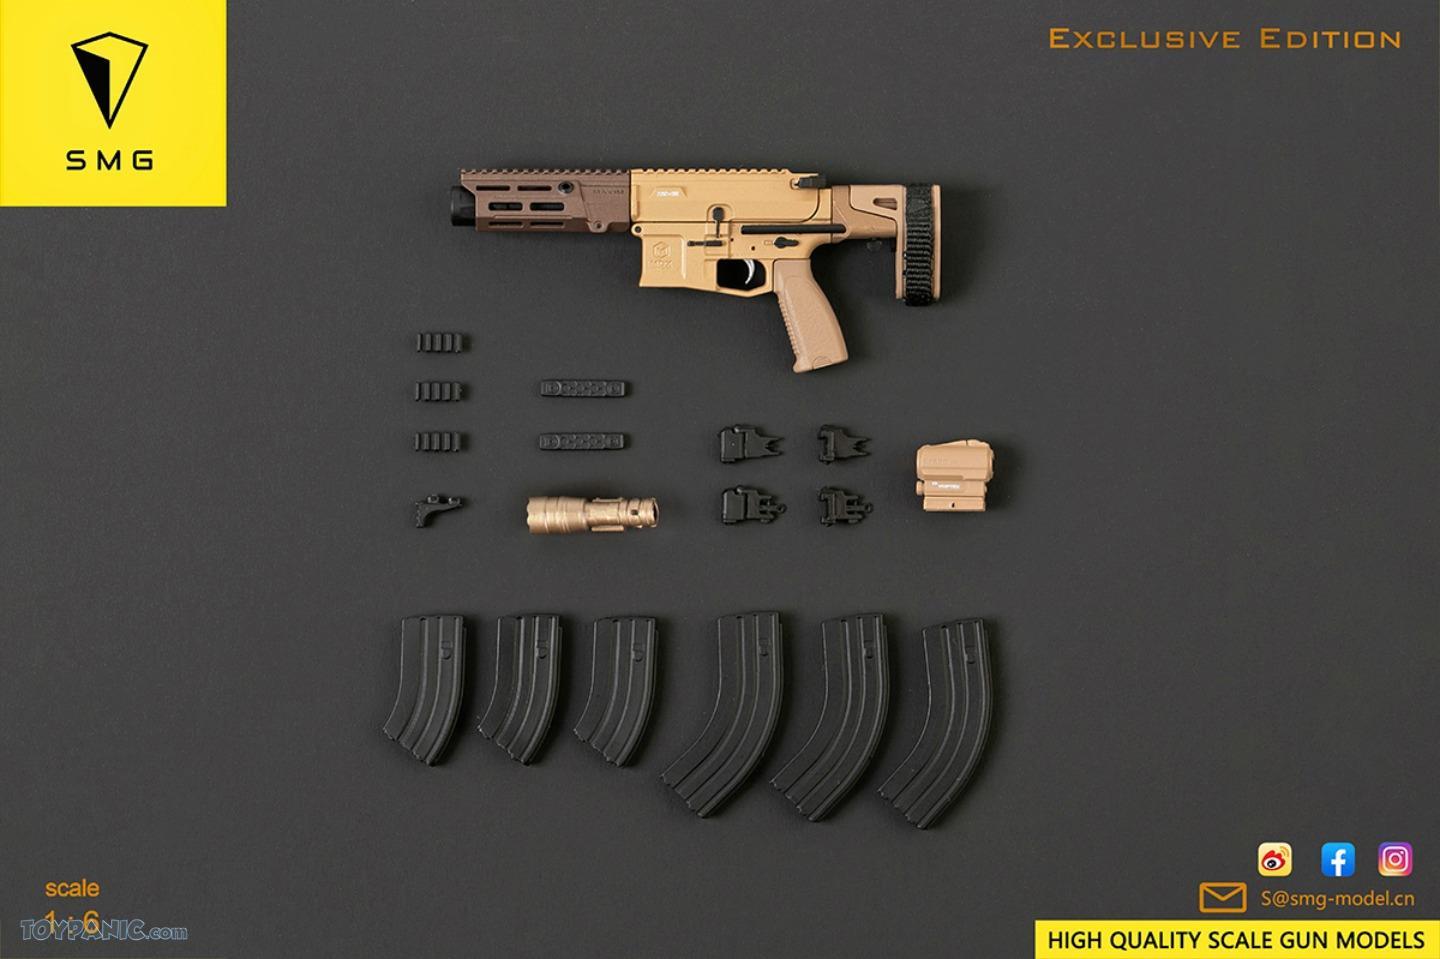 NEW PRODUCT: SMG Guns (11 products) 299202225942AM_2731904